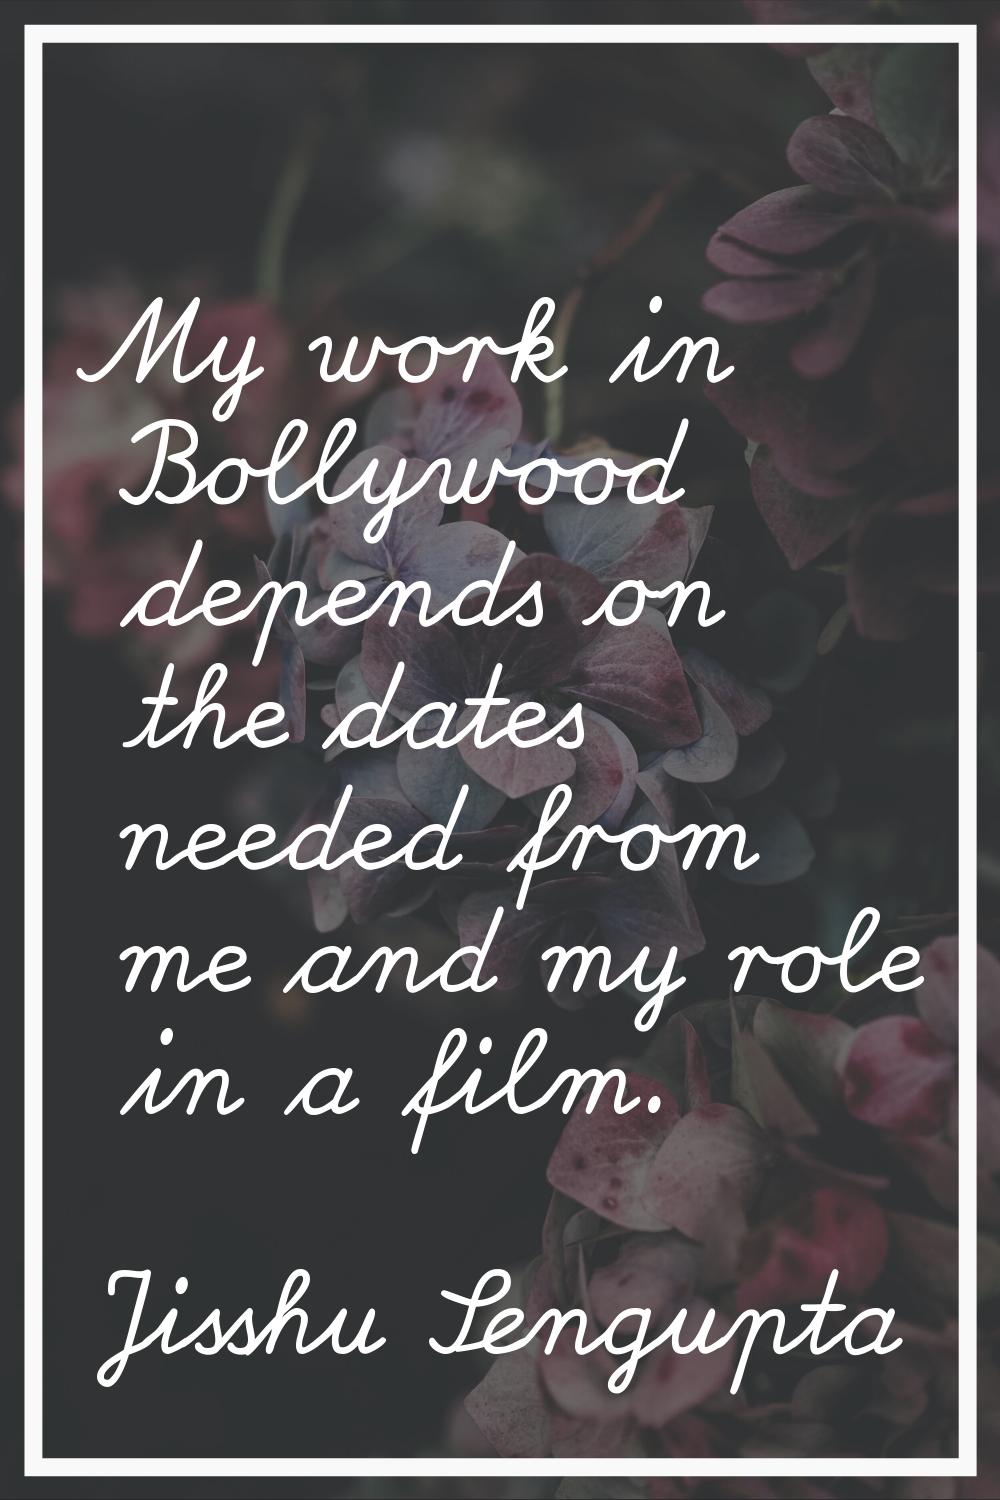 My work in Bollywood depends on the dates needed from me and my role in a film.